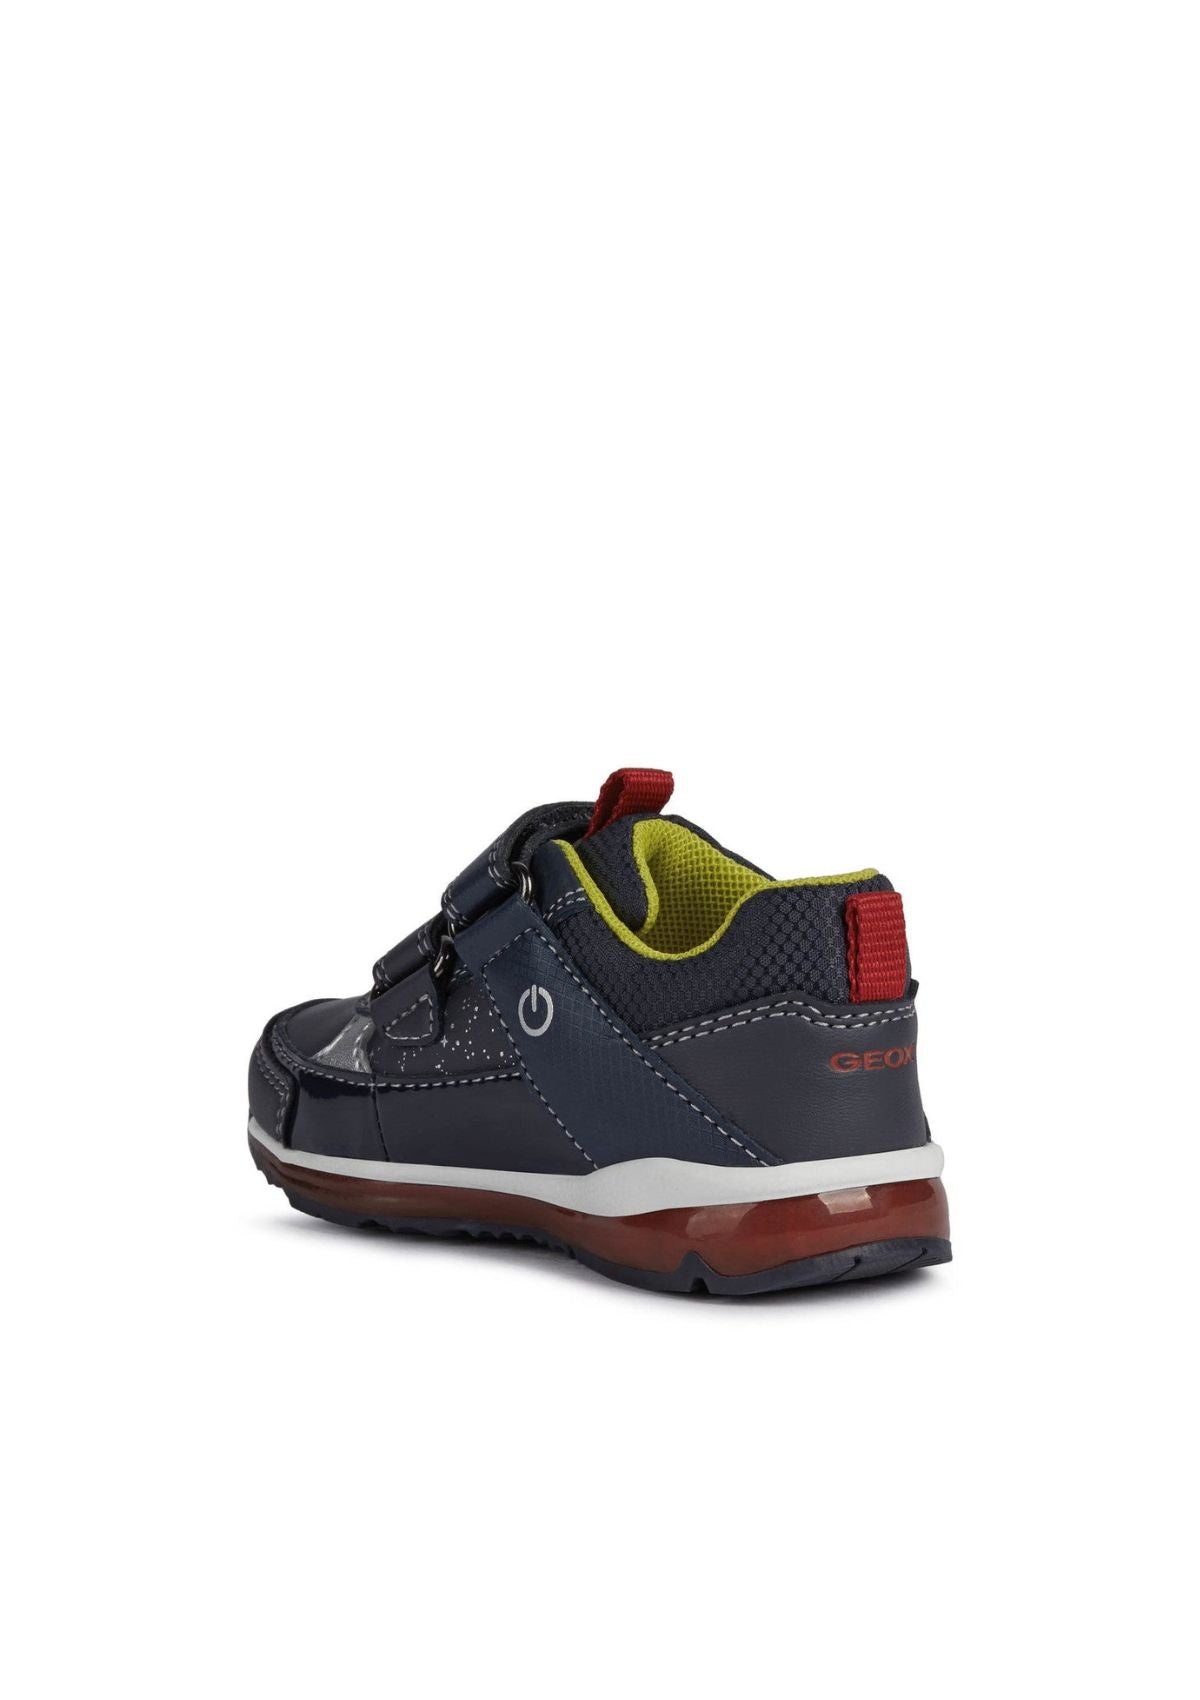 Geox Baby Boys TODO Navy Red Back